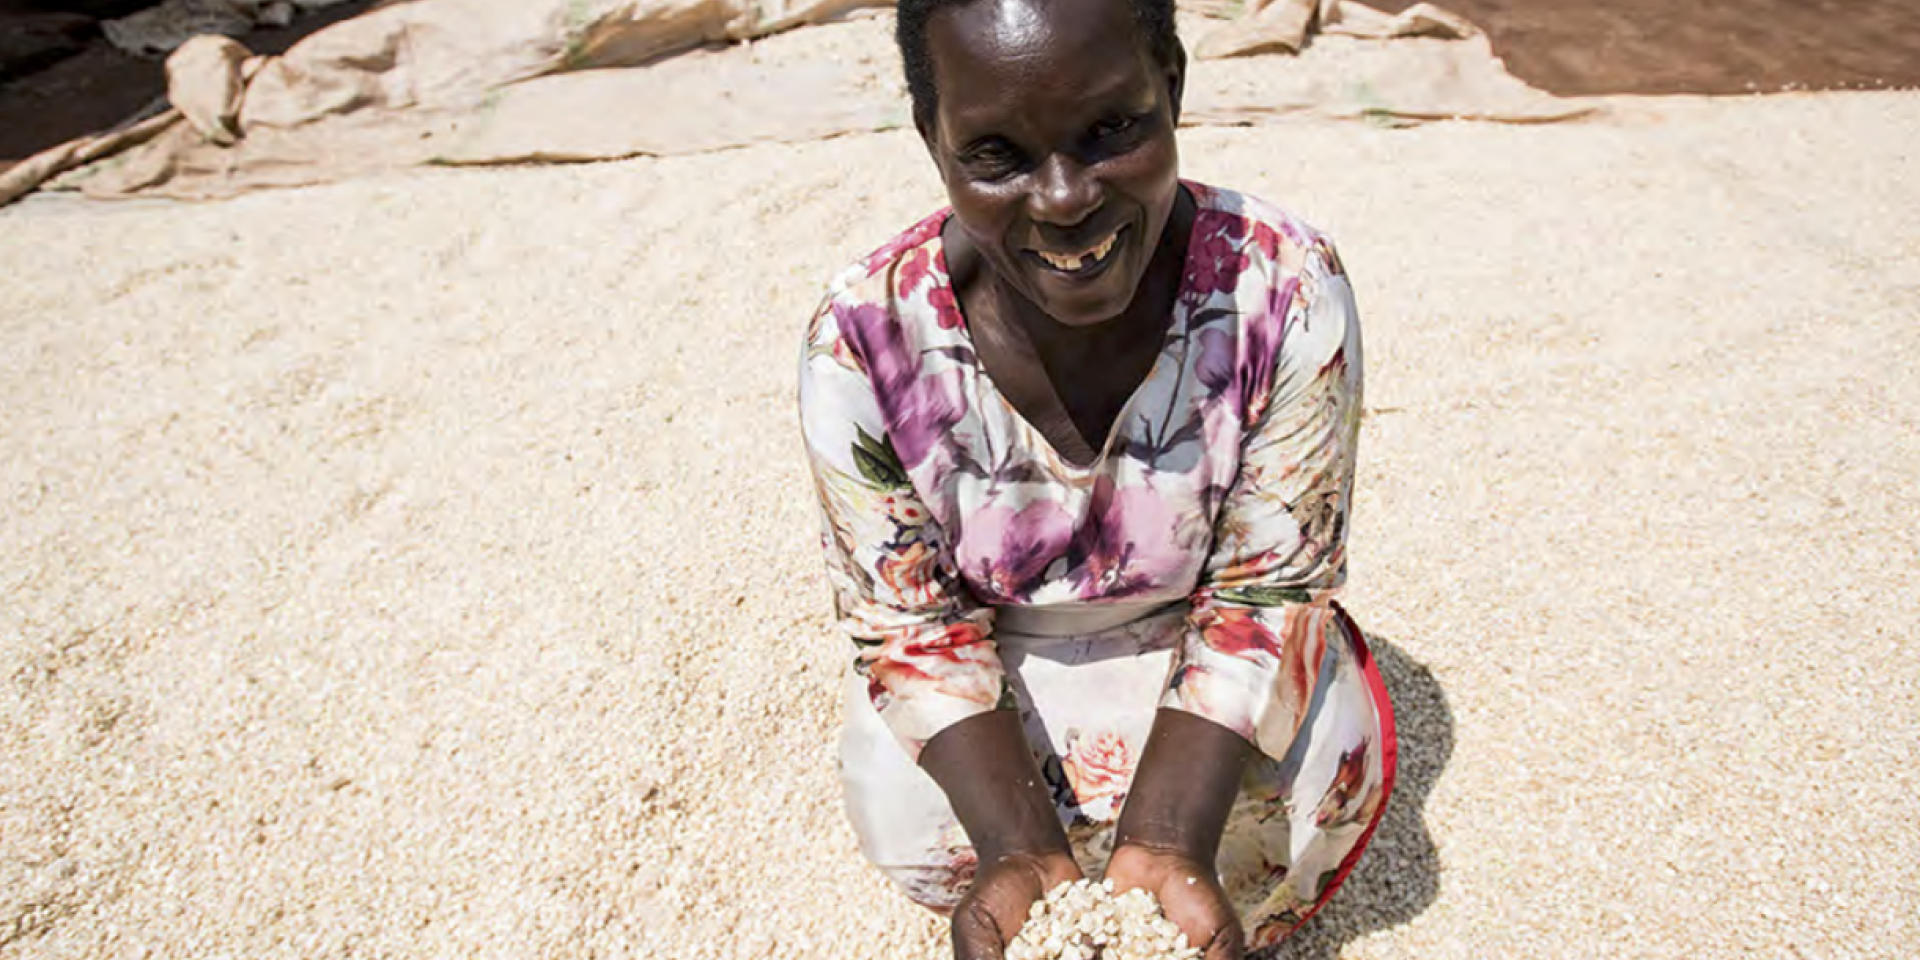 Woman farmer showing off her seeds